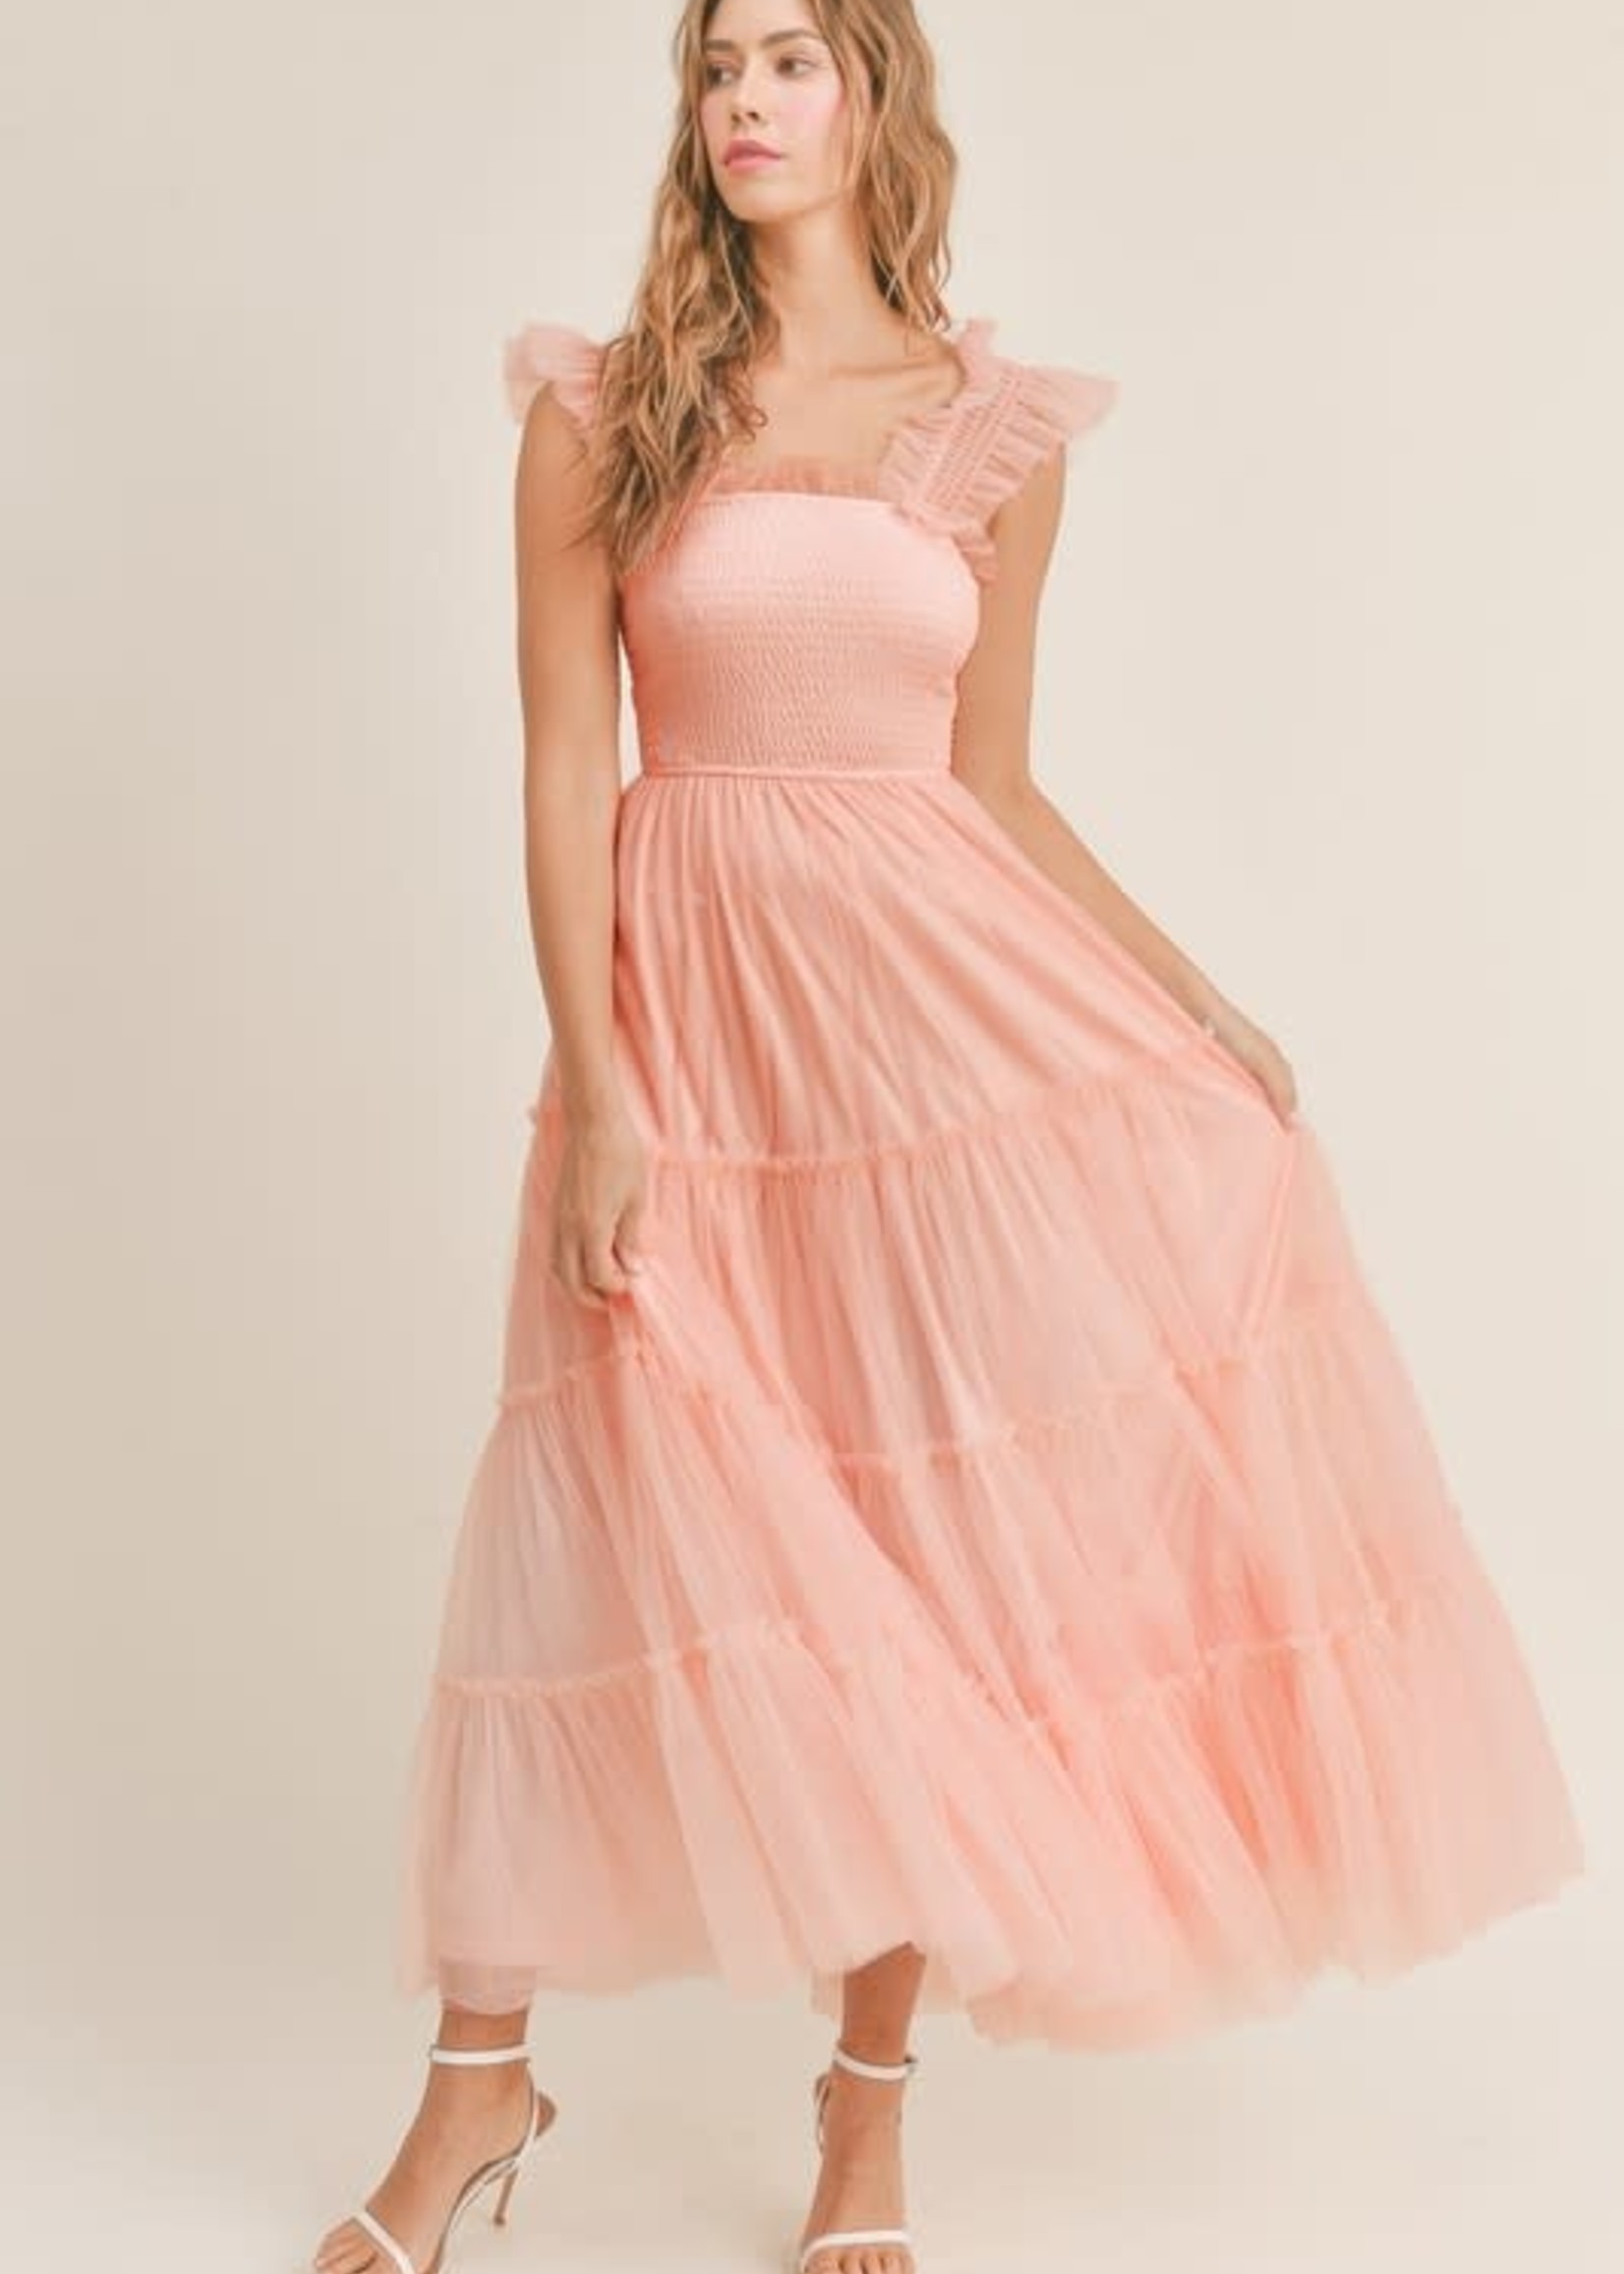 Blush Time for Tulle Dress